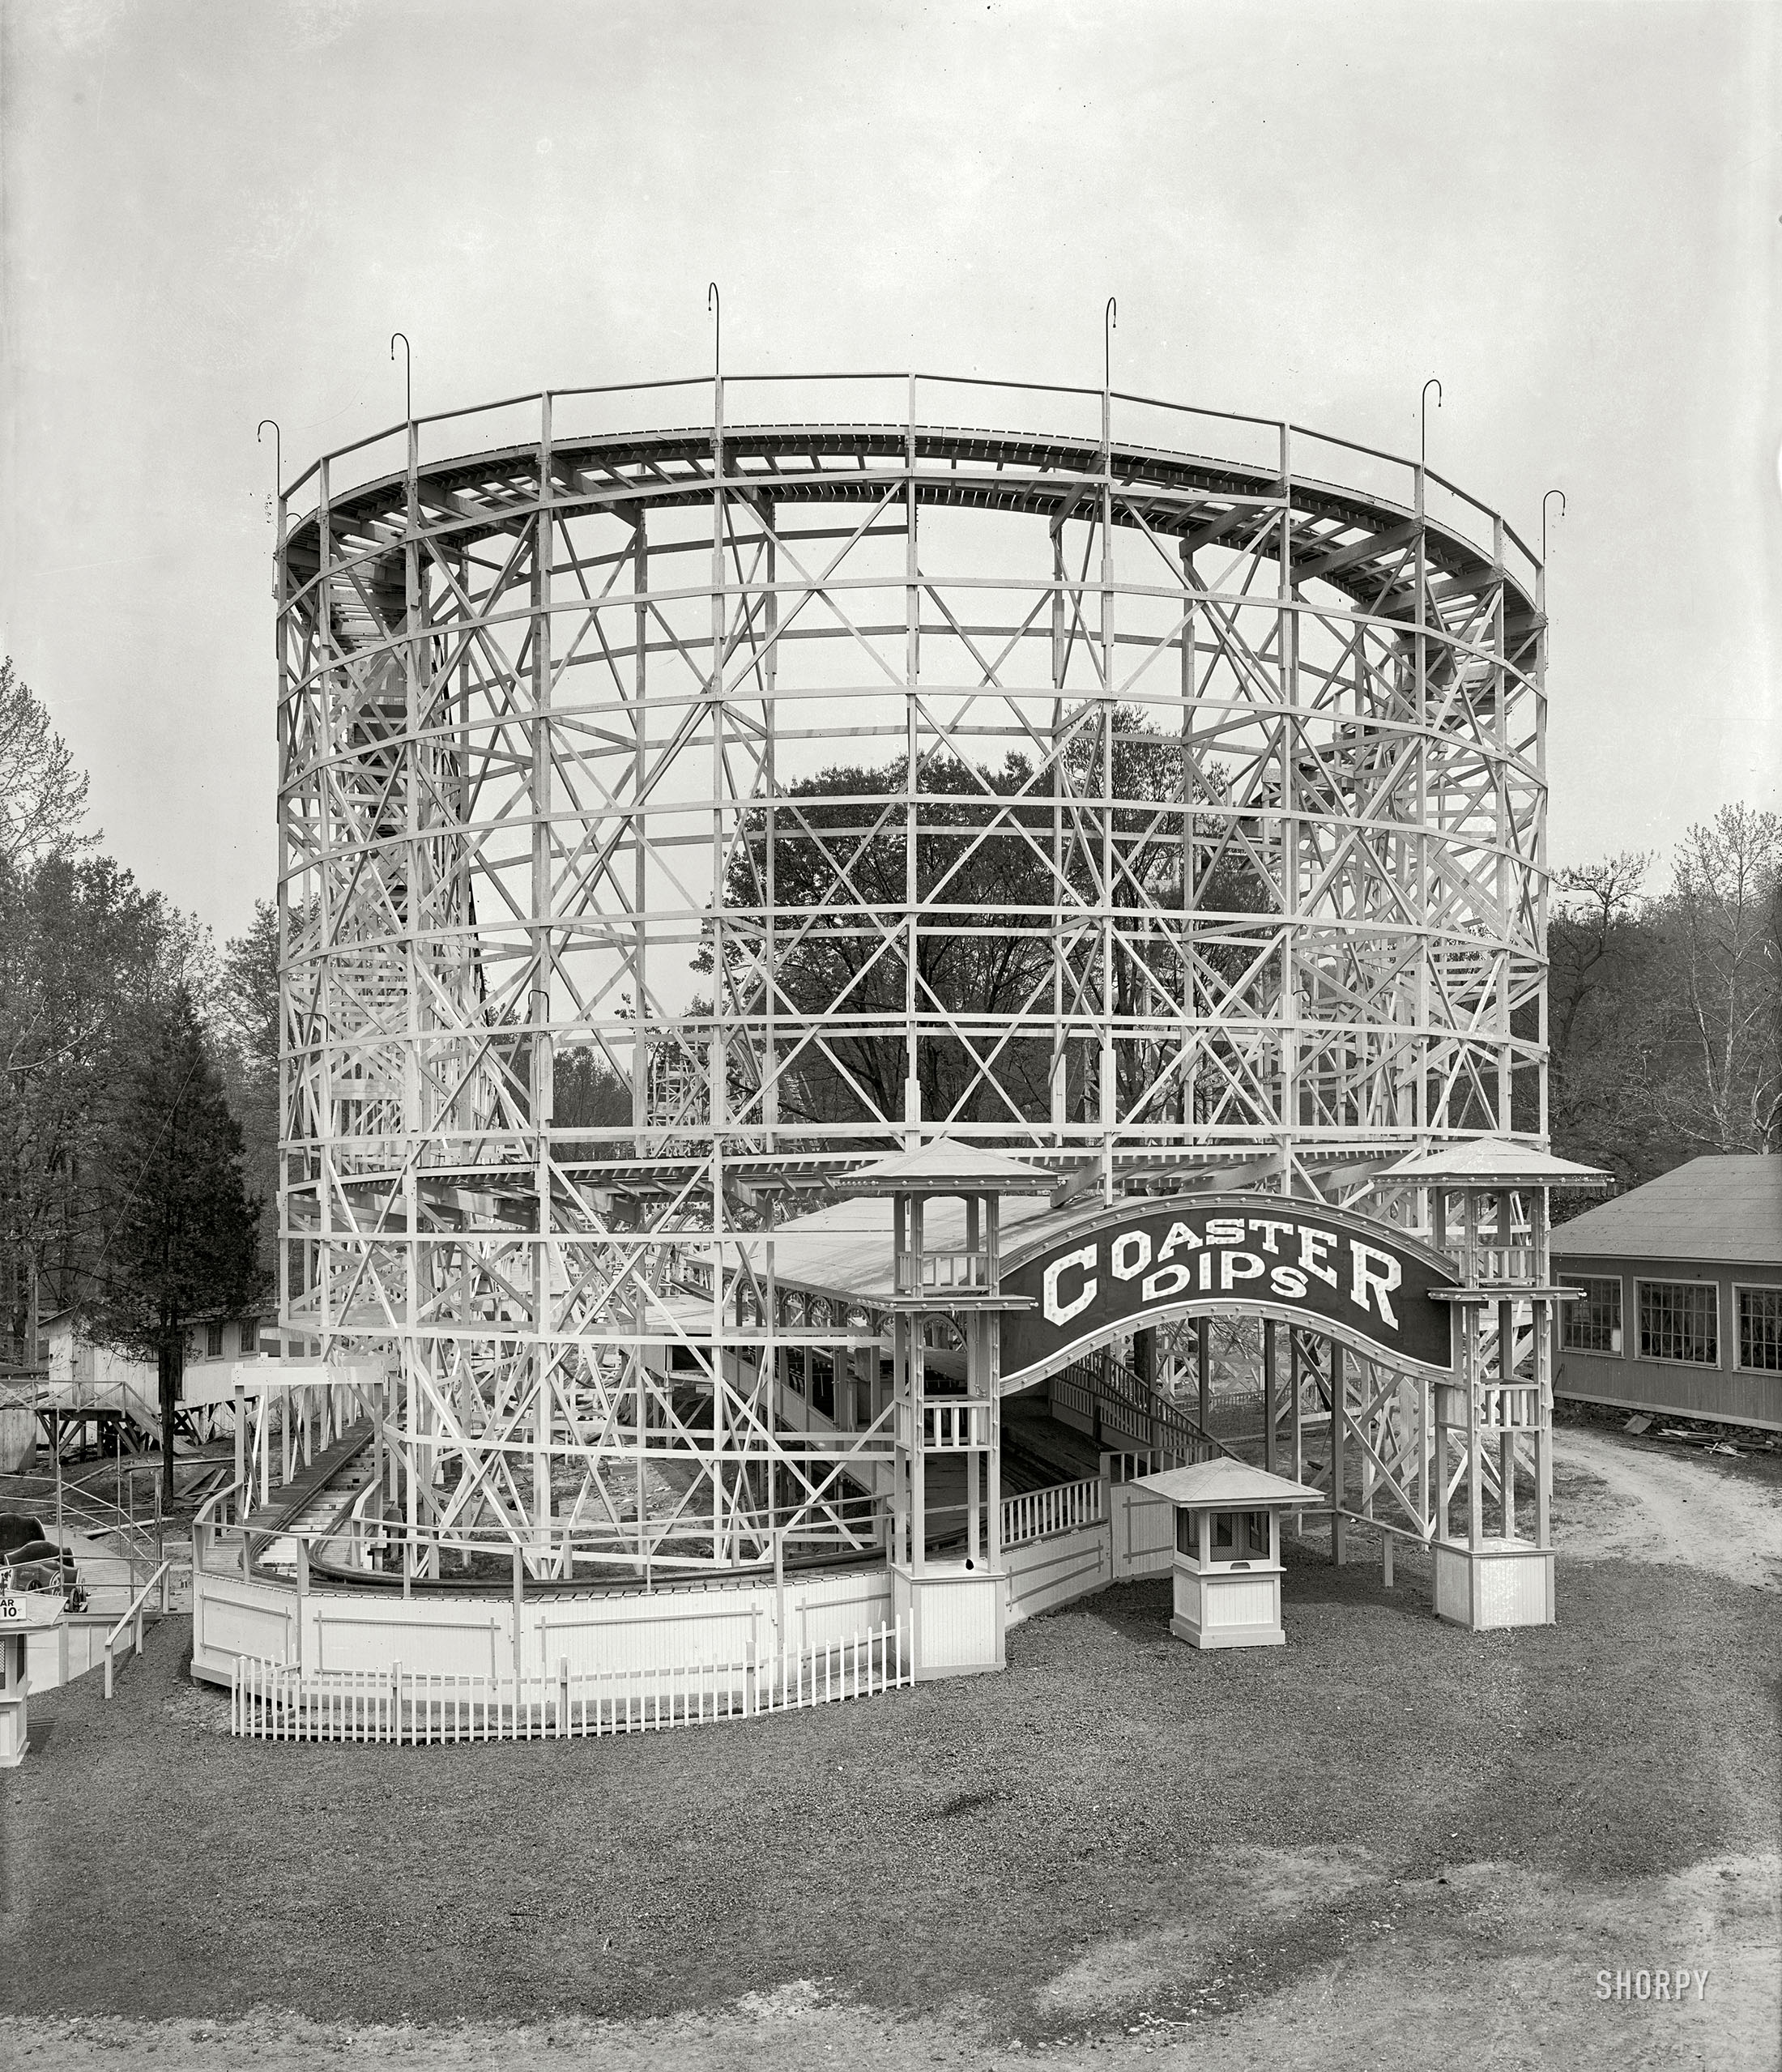 Montgomery County, Maryland, circa 1928. "Glen Echo Amusement Co." The Coaster Dips roller coaster at Glen Echo Park outside Washington, D.C. National Photo Company Collection glass negative. View full size.